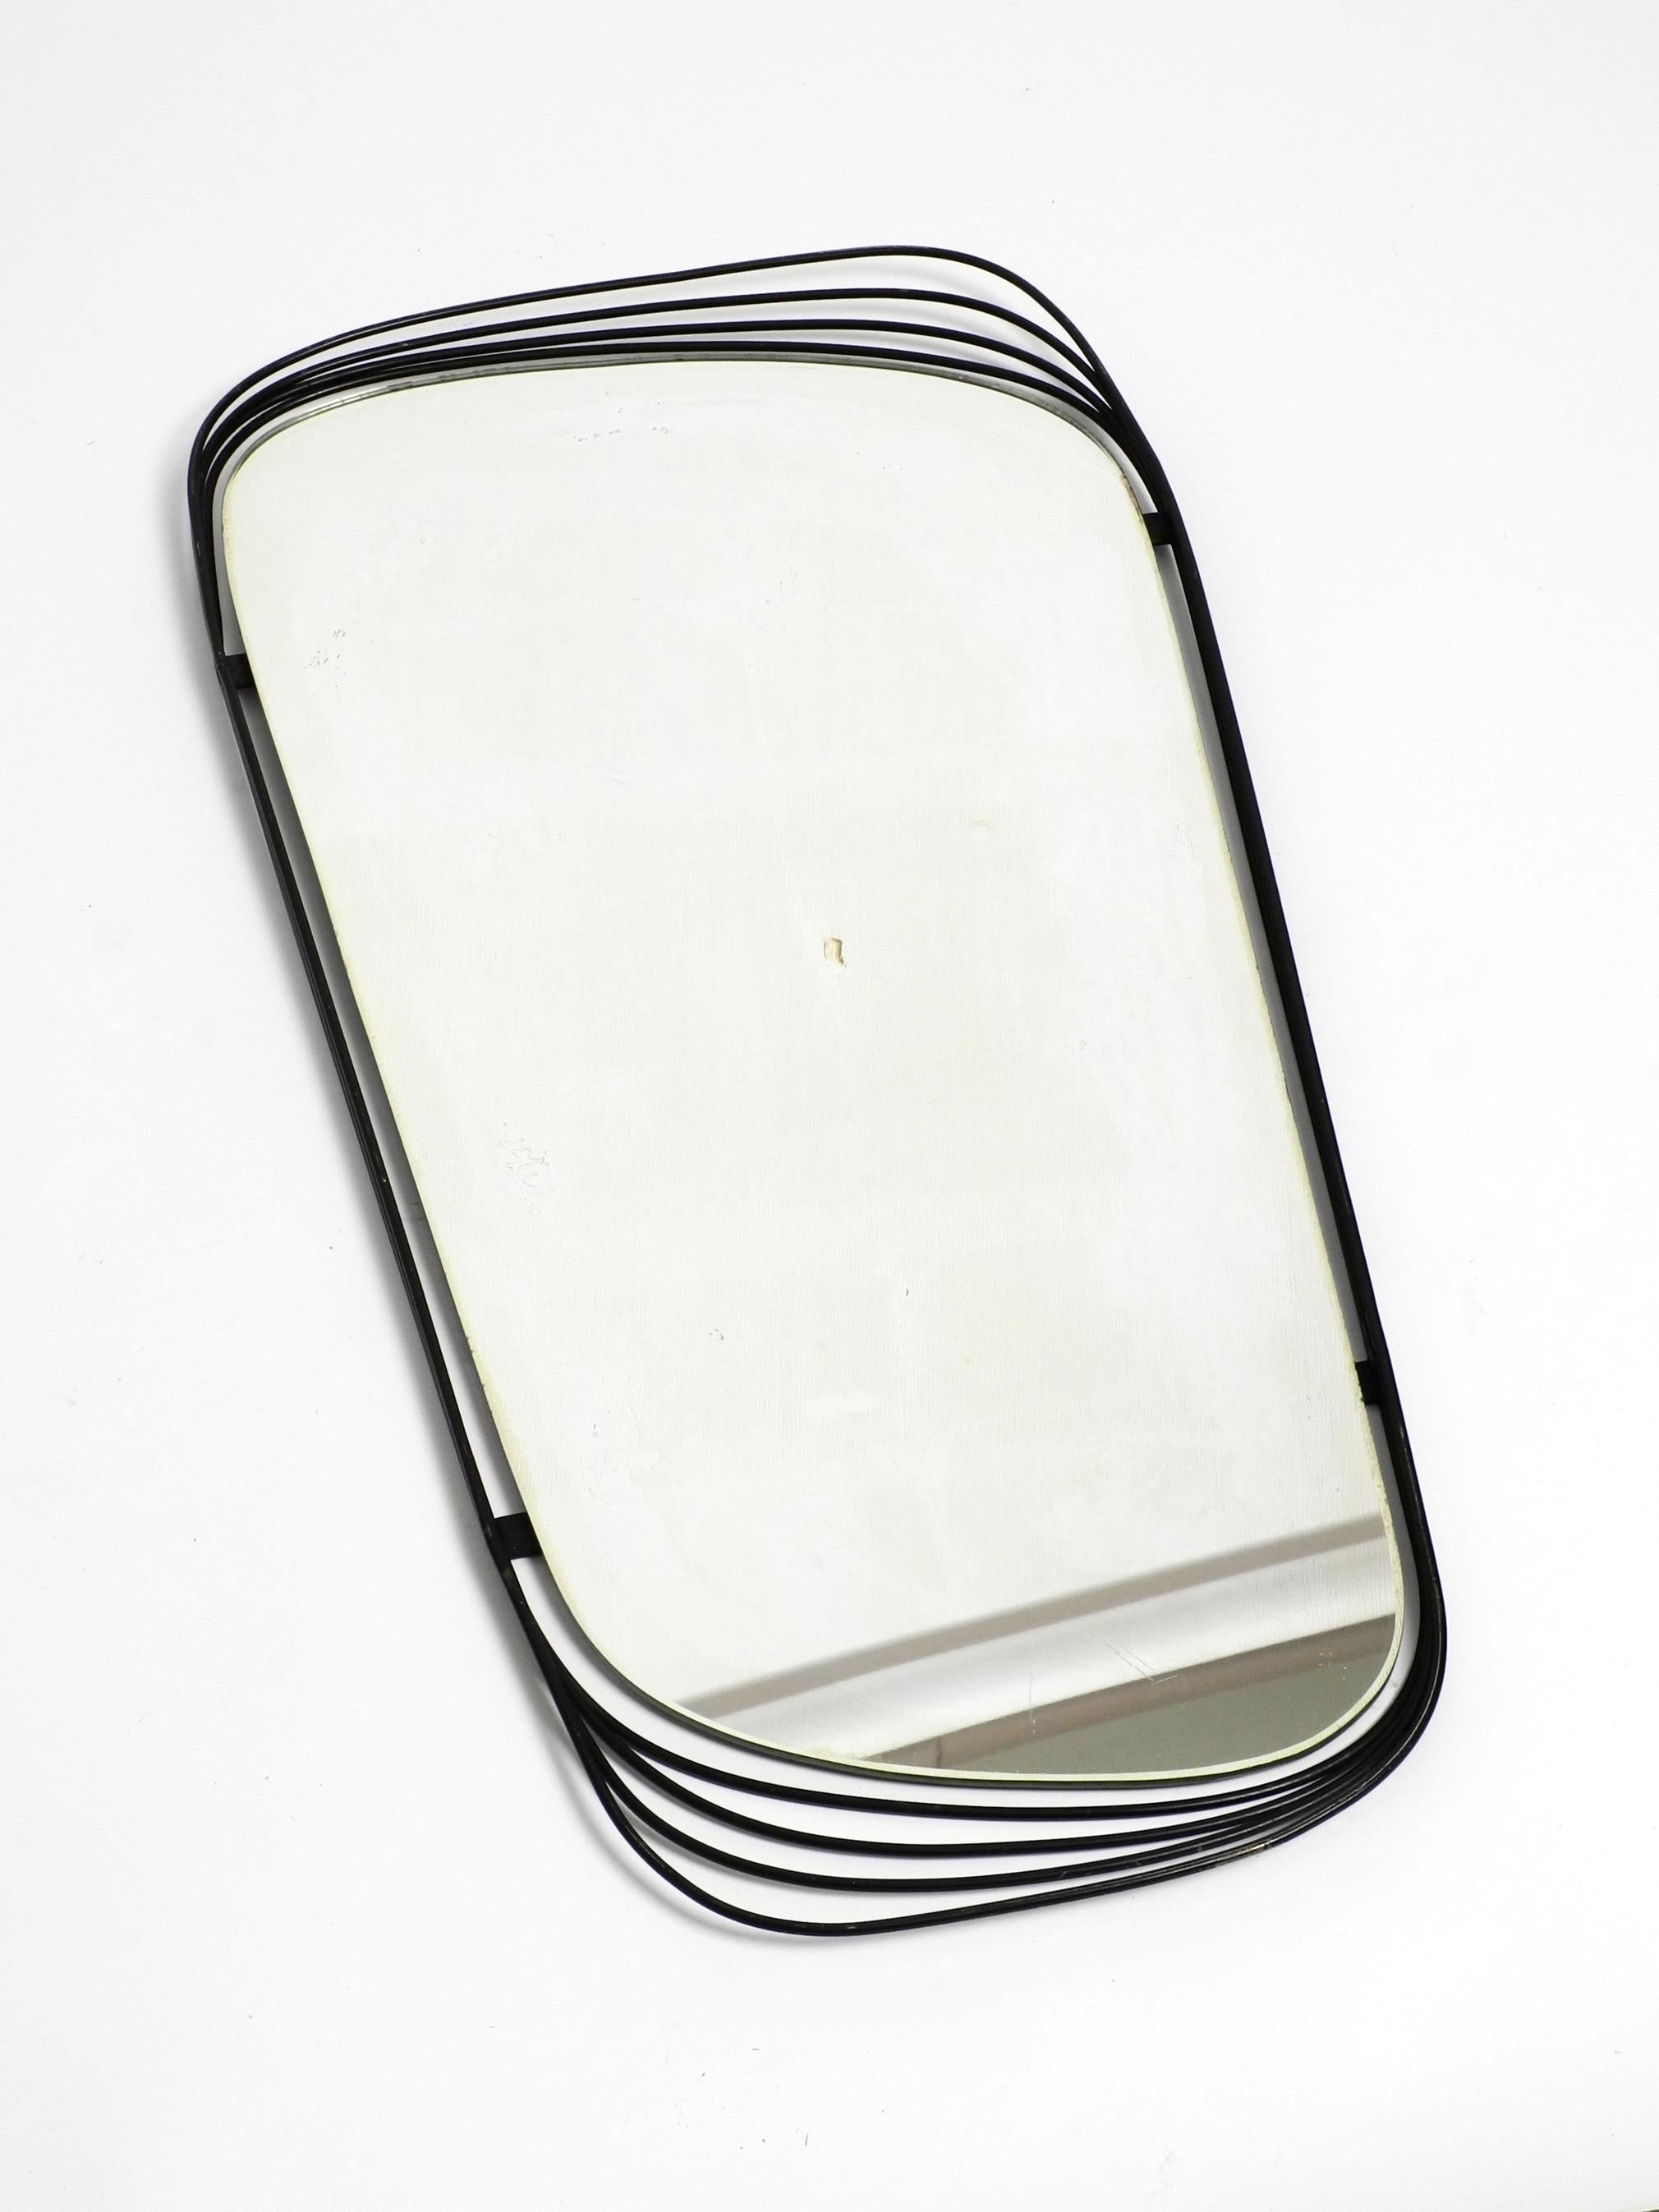 Very rare heavy Mid-Century Modern wall mirror with a black abstract metal frame.
Beautiful asymmetrical design. Made in Germany.
The mirror glass became slightly yellow and has become somewhat dull.
There is also one dark little spot in the